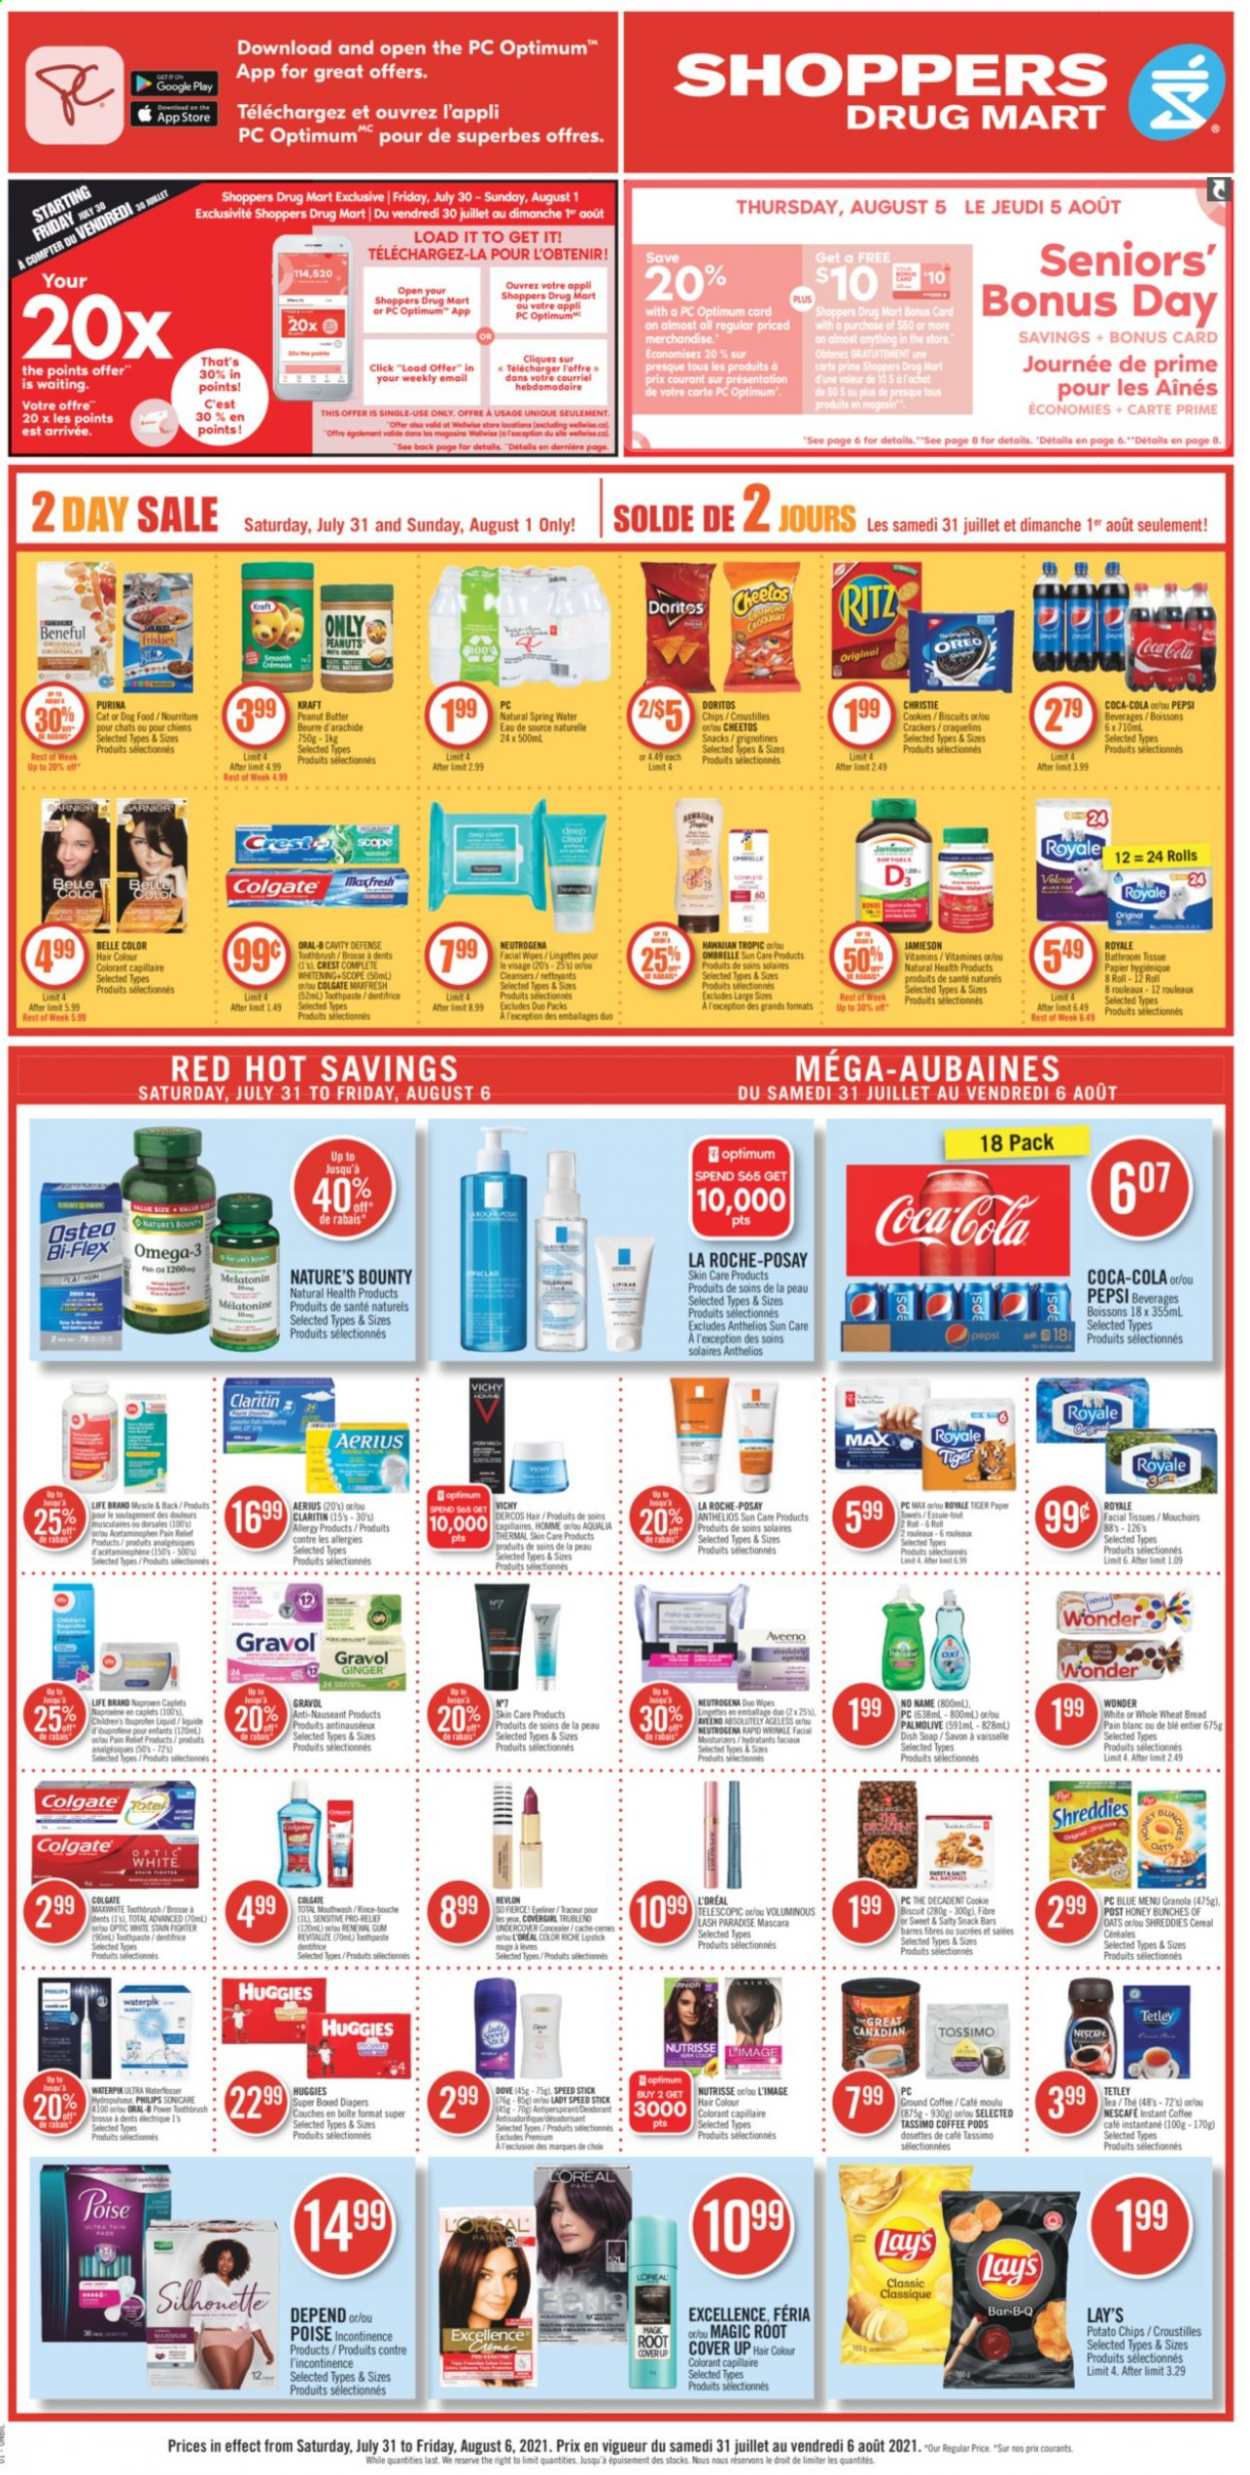 thumbnail - Shoppers Drug Mart Flyer - July 31, 2021 - August 06, 2021 - Sales products - cookies, snack, crackers, biscuit, snack bar, RITZ, Doritos, potato chips, Cheetos, Lay’s, cereals, ginger, Kraft®, peanut butter, peanuts, Coca-Cola, Pepsi, spring water, tea, coffee pods, instant coffee, ground coffee, wipes, nappies, Aveeno, bath tissue, kitchen towels, paper towels, Vichy, Palmolive, soap, toothbrush, toothpaste, Crest, facial tissues, L’Oréal, La Roche-Posay, Revlon, hair color, Speed Stick, corrector, lipstick, Sonicare, Melatonin, Nature's Bounty, Omega-3, Bi-Flex, Oreo, granola, mascara, Neutrogena, Huggies, chips, Nescafé. Page 1.